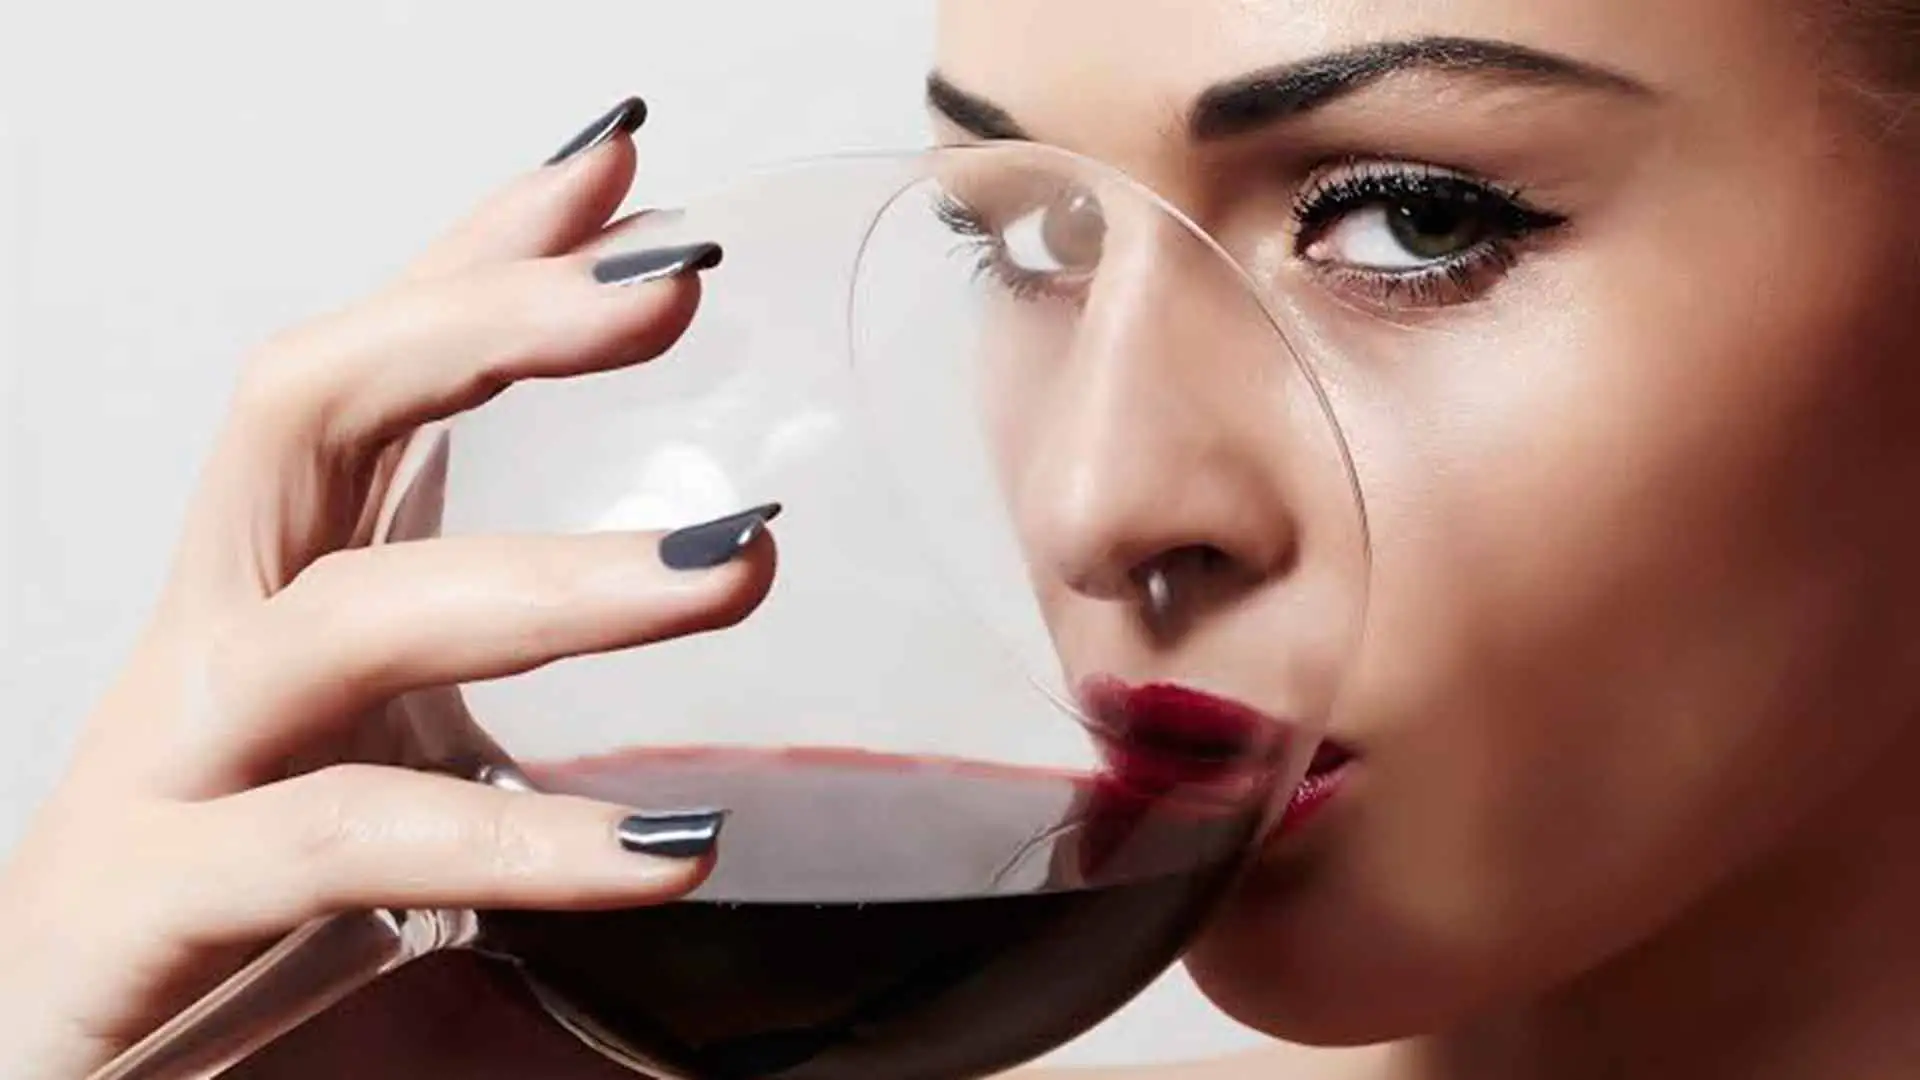 After all, drinking a glass of wine really makes you lose weight, doesn't it?